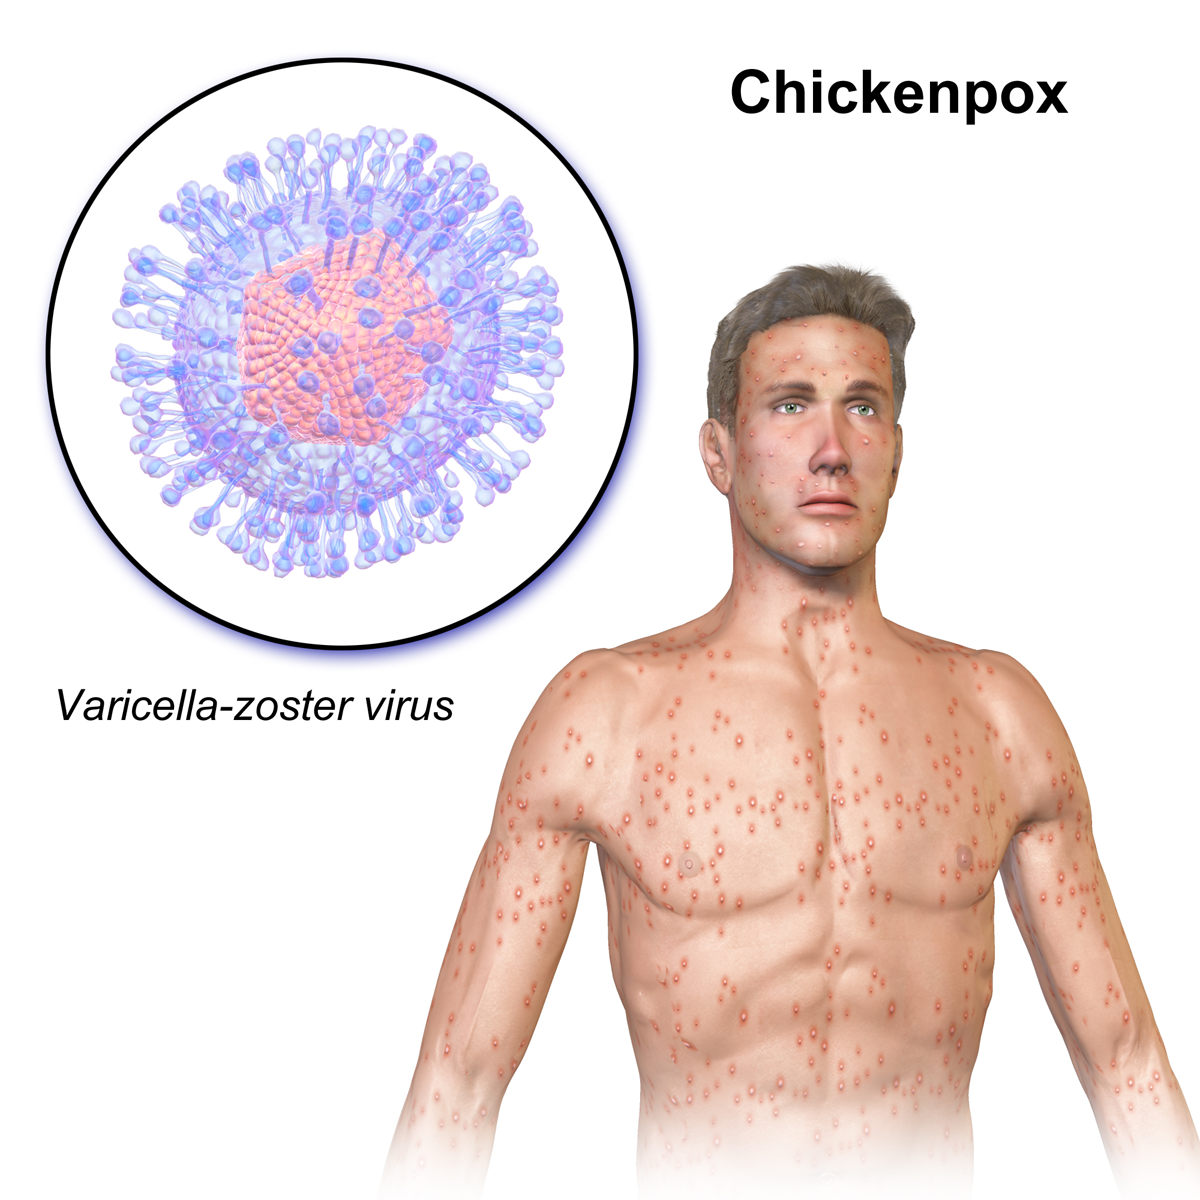 The itchy chickenpox rash appears after 1 to 2 days of symptoms.